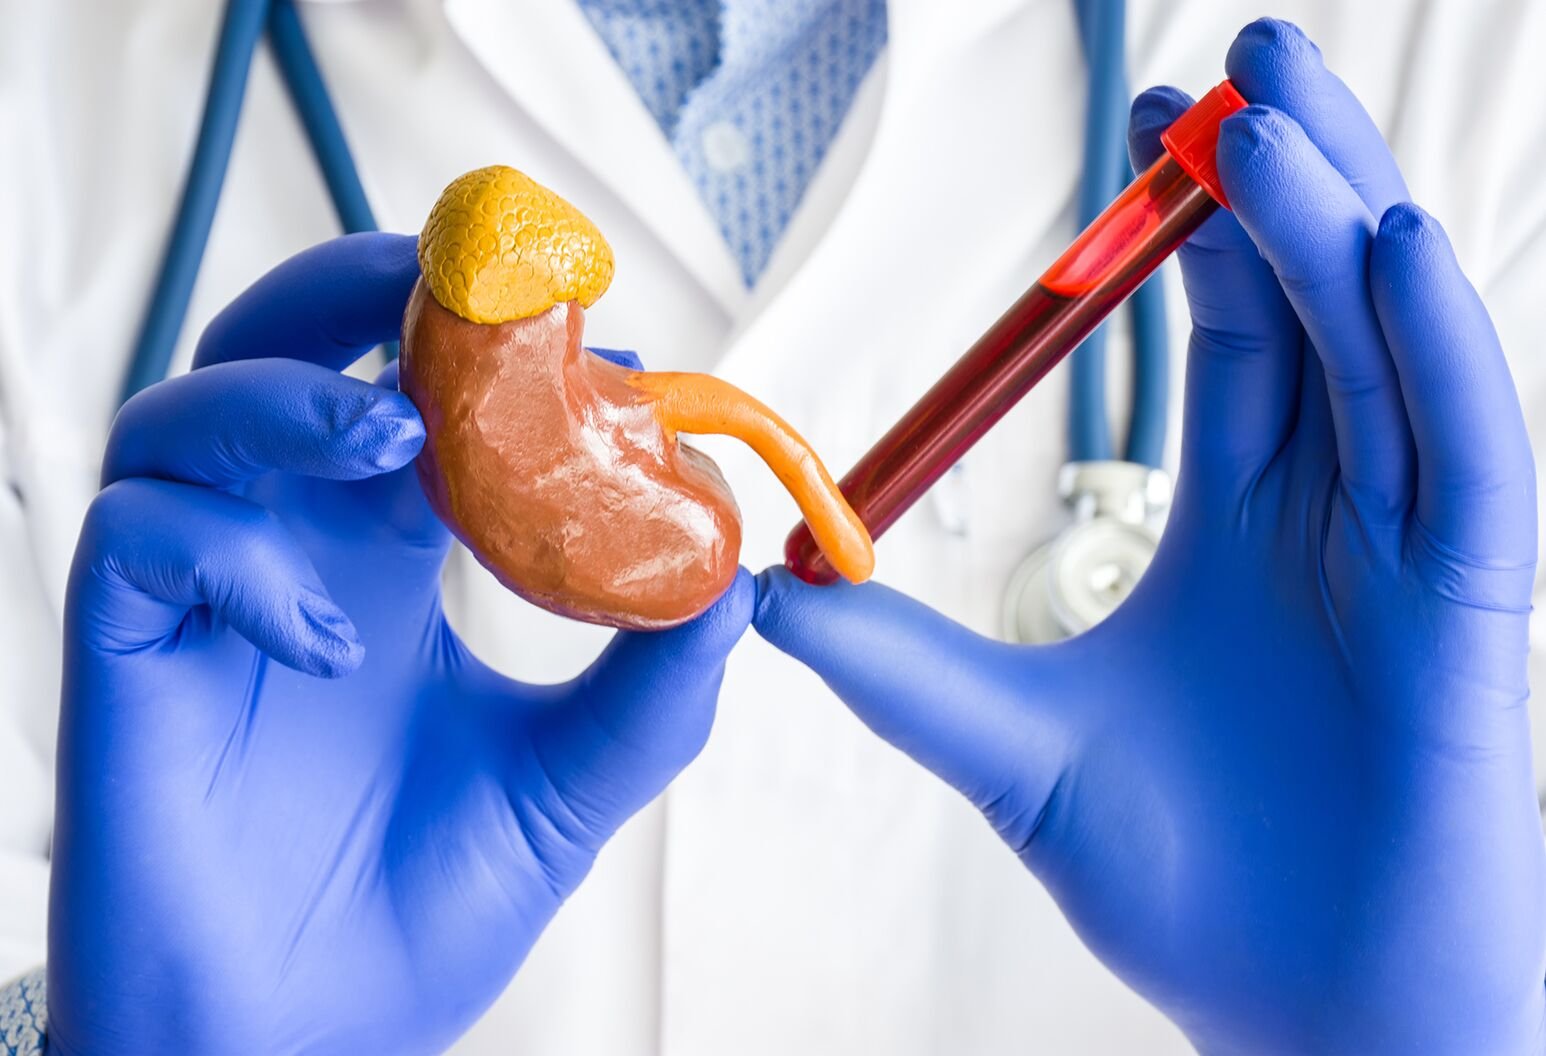 Blood test shows if organs are aging fast or slow